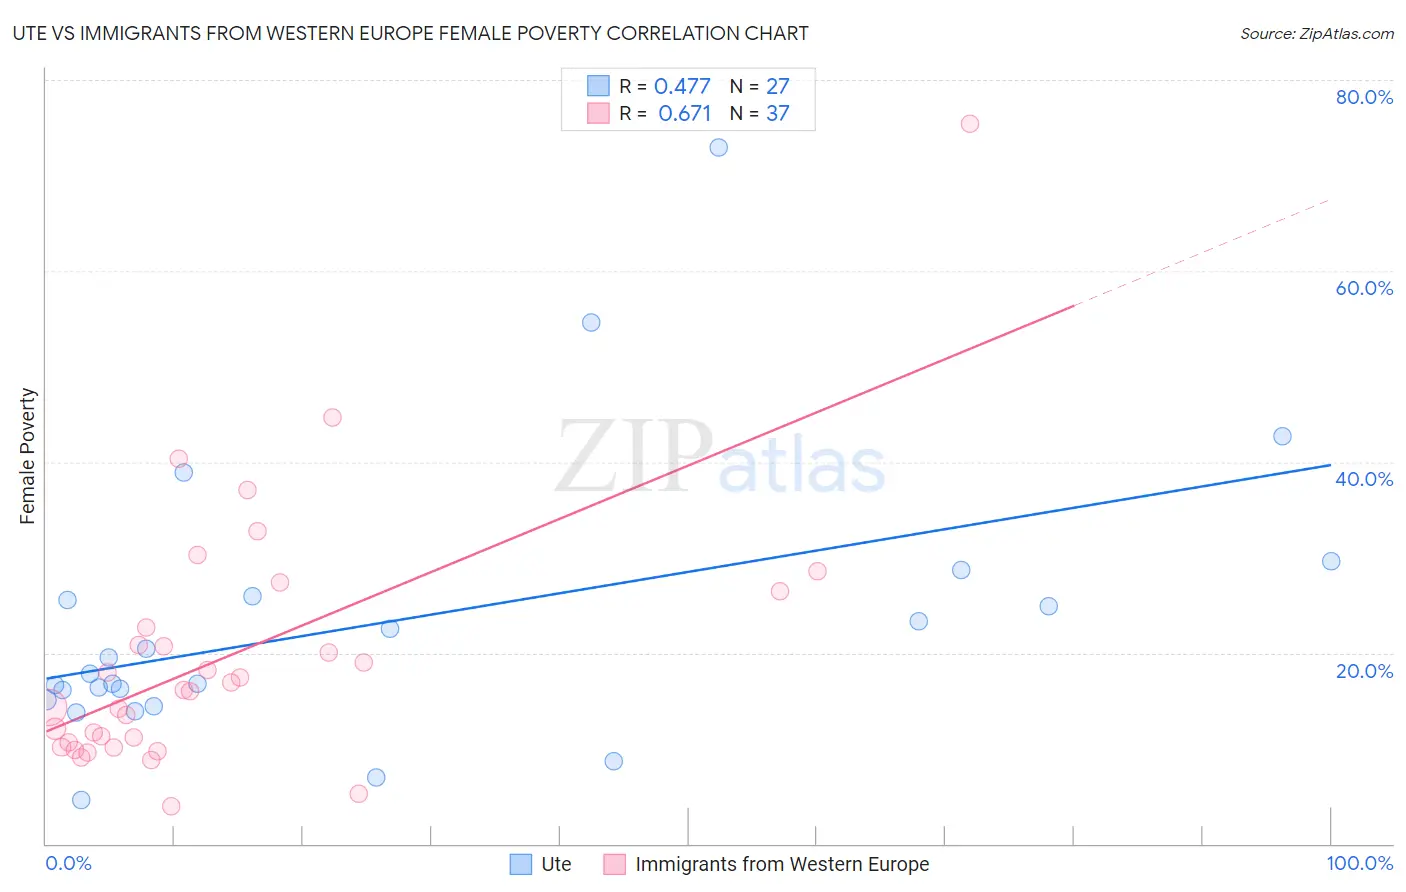 Ute vs Immigrants from Western Europe Female Poverty